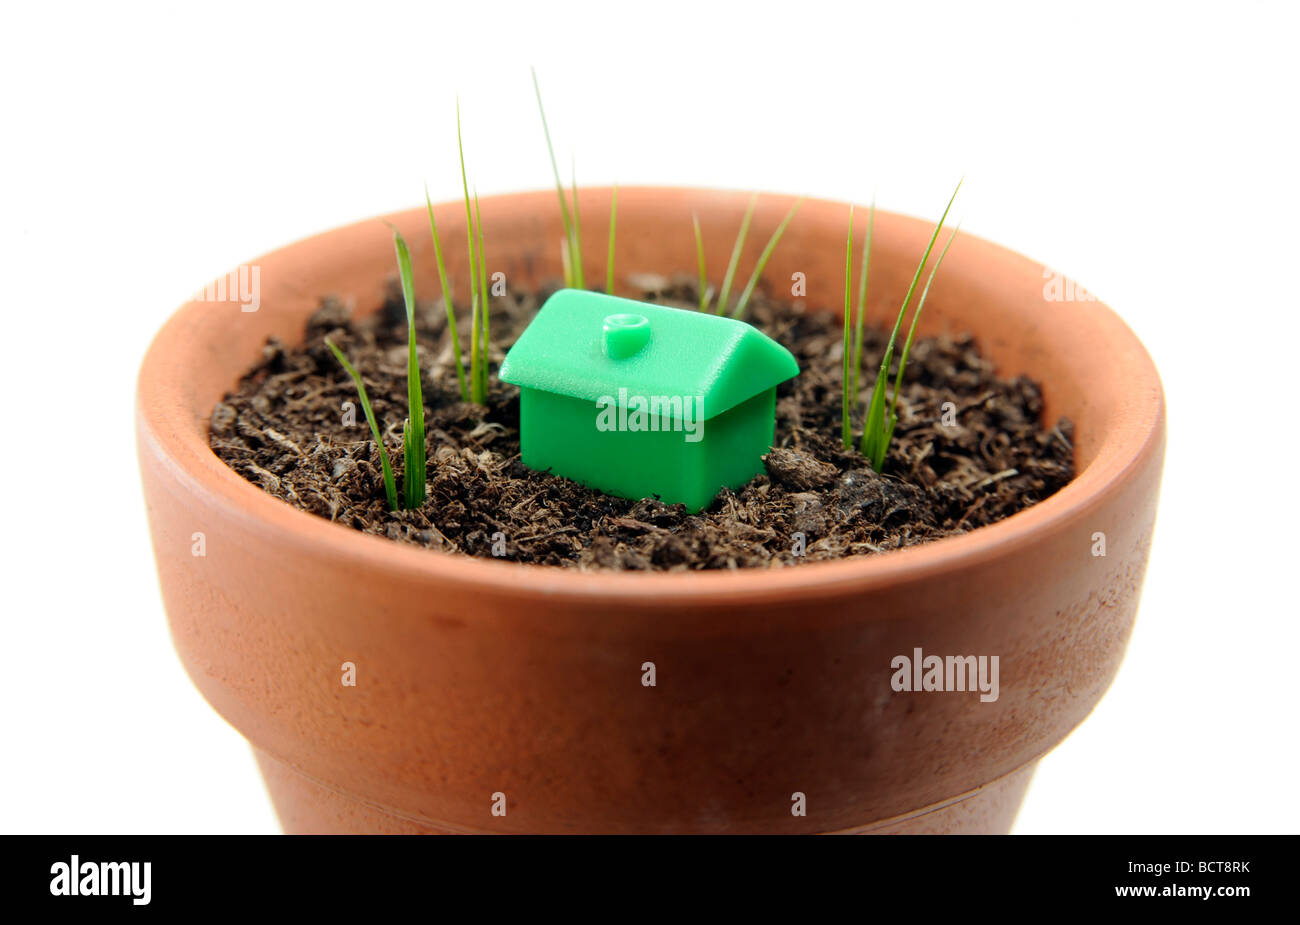 MODEL HOUSE WITH GREENSHOOTS IN PLANTPOT RE HOUSING MARKET RECOVERY,GROWTH Stock Photo